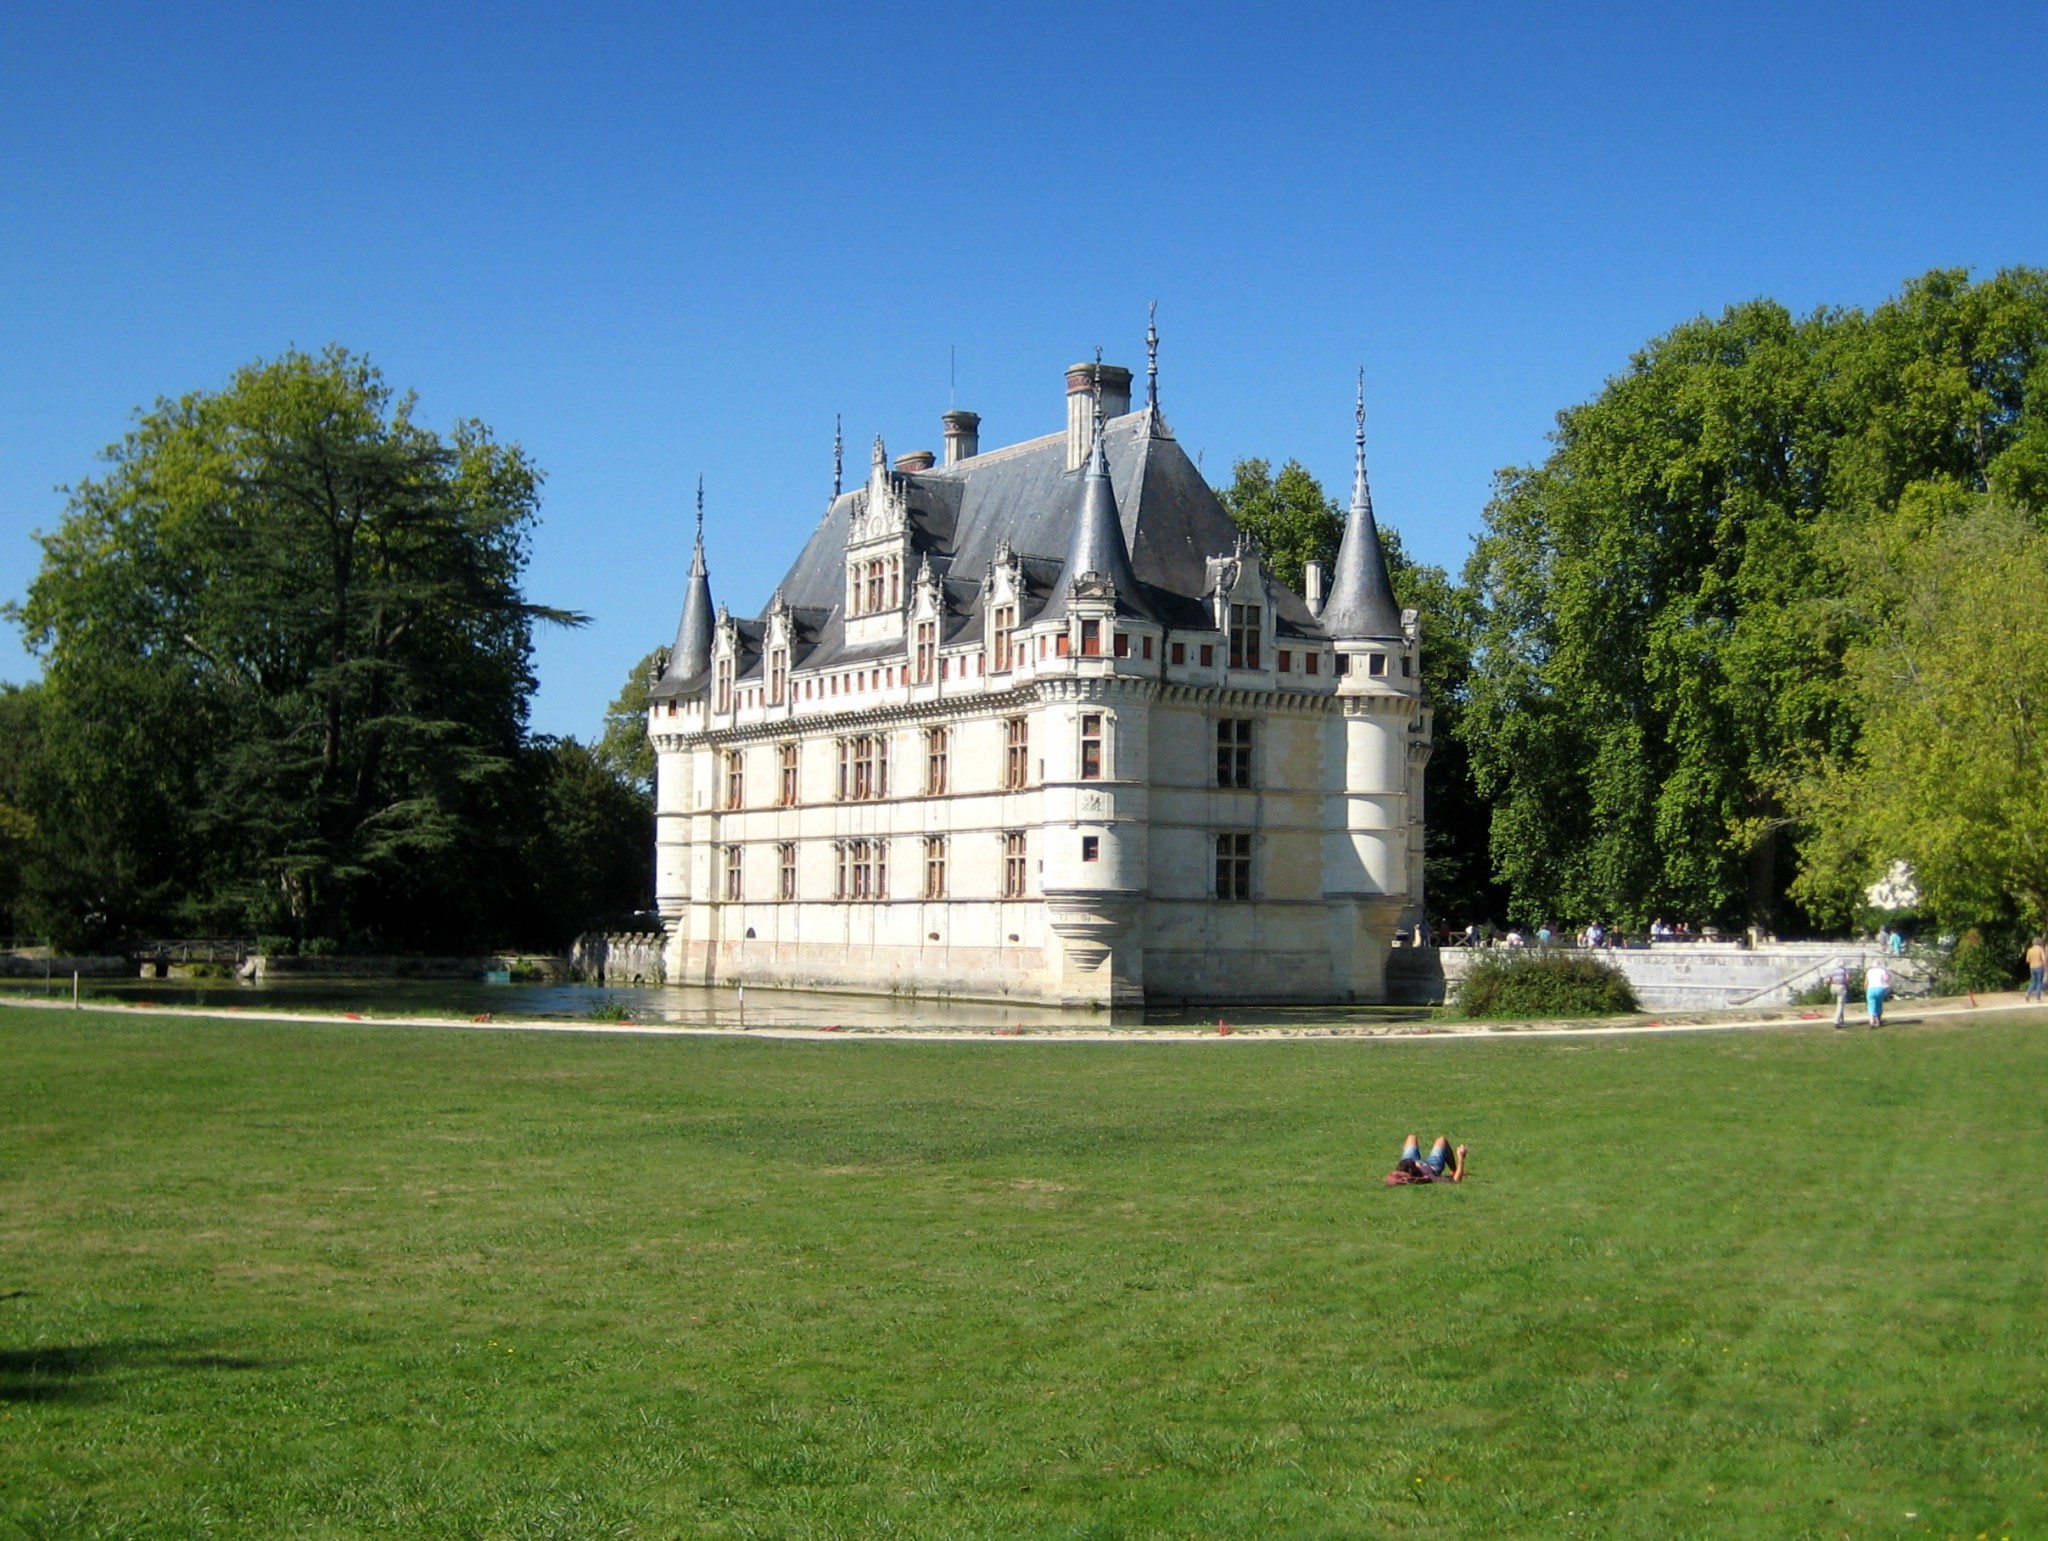 Azay-le-Rideau © Stabron - licence [CC BY-SA 3.0] from Wikimedia Commons